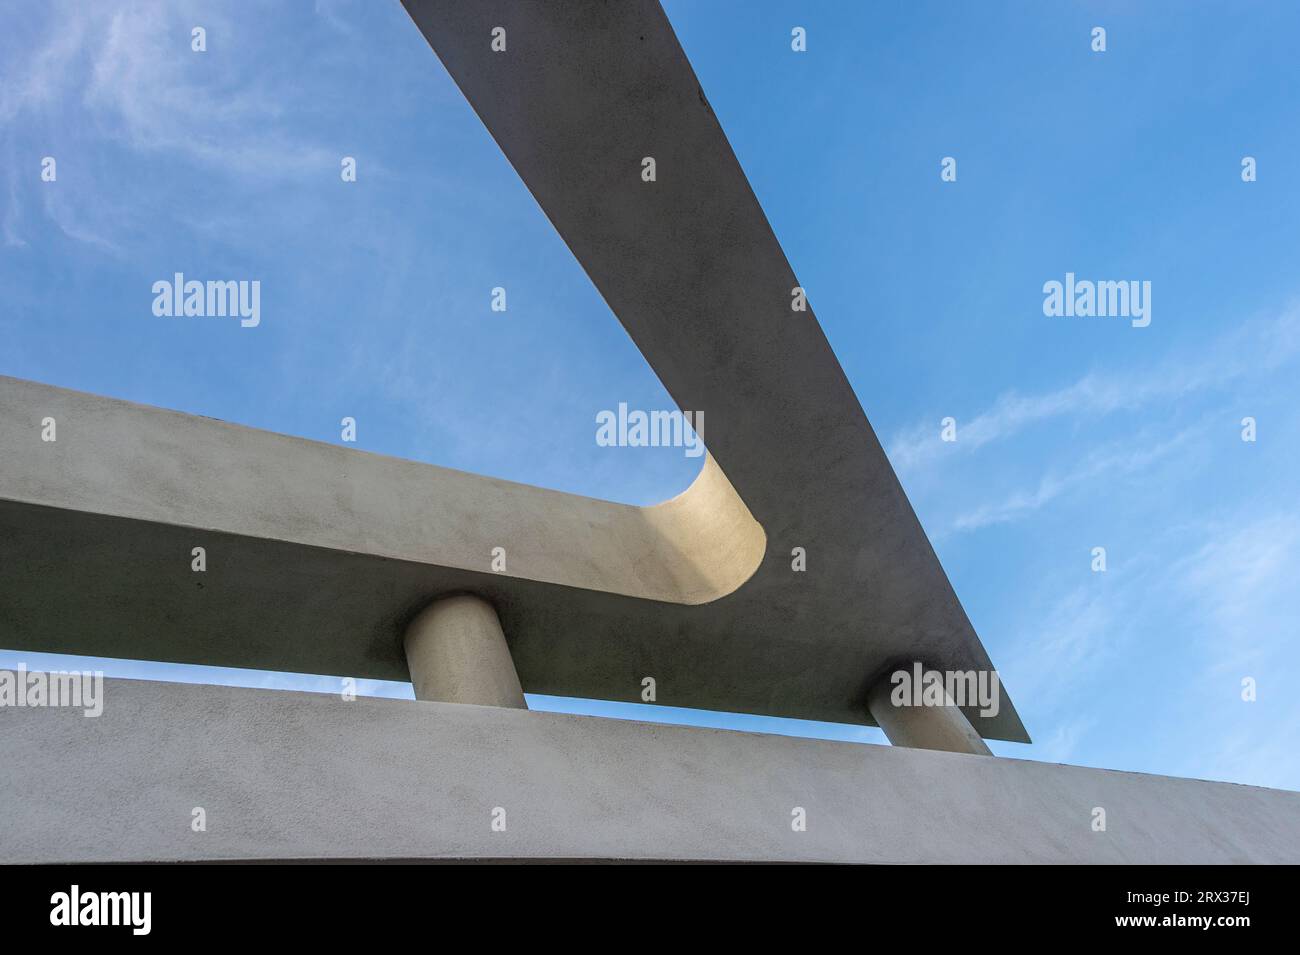 Сoncrete architecture, close up triangle section Stock Photo